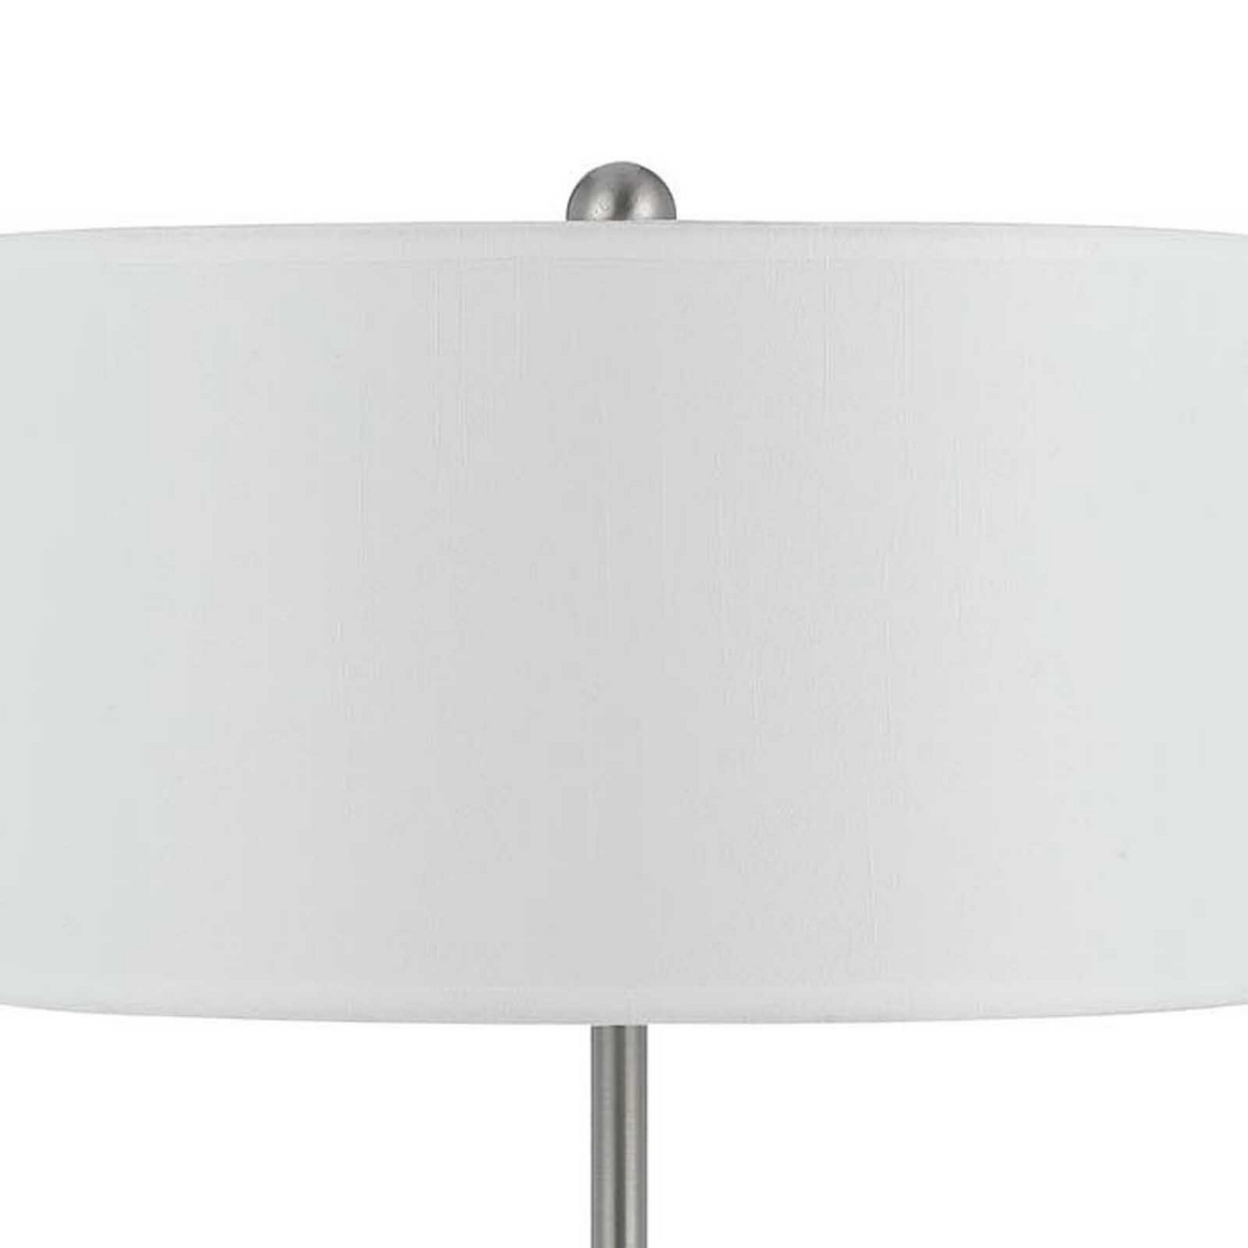 27 Inch Modern Table Lamp With Round Drum Shade, 2 Outlets, White, Chrome- Saltoro Sherpi